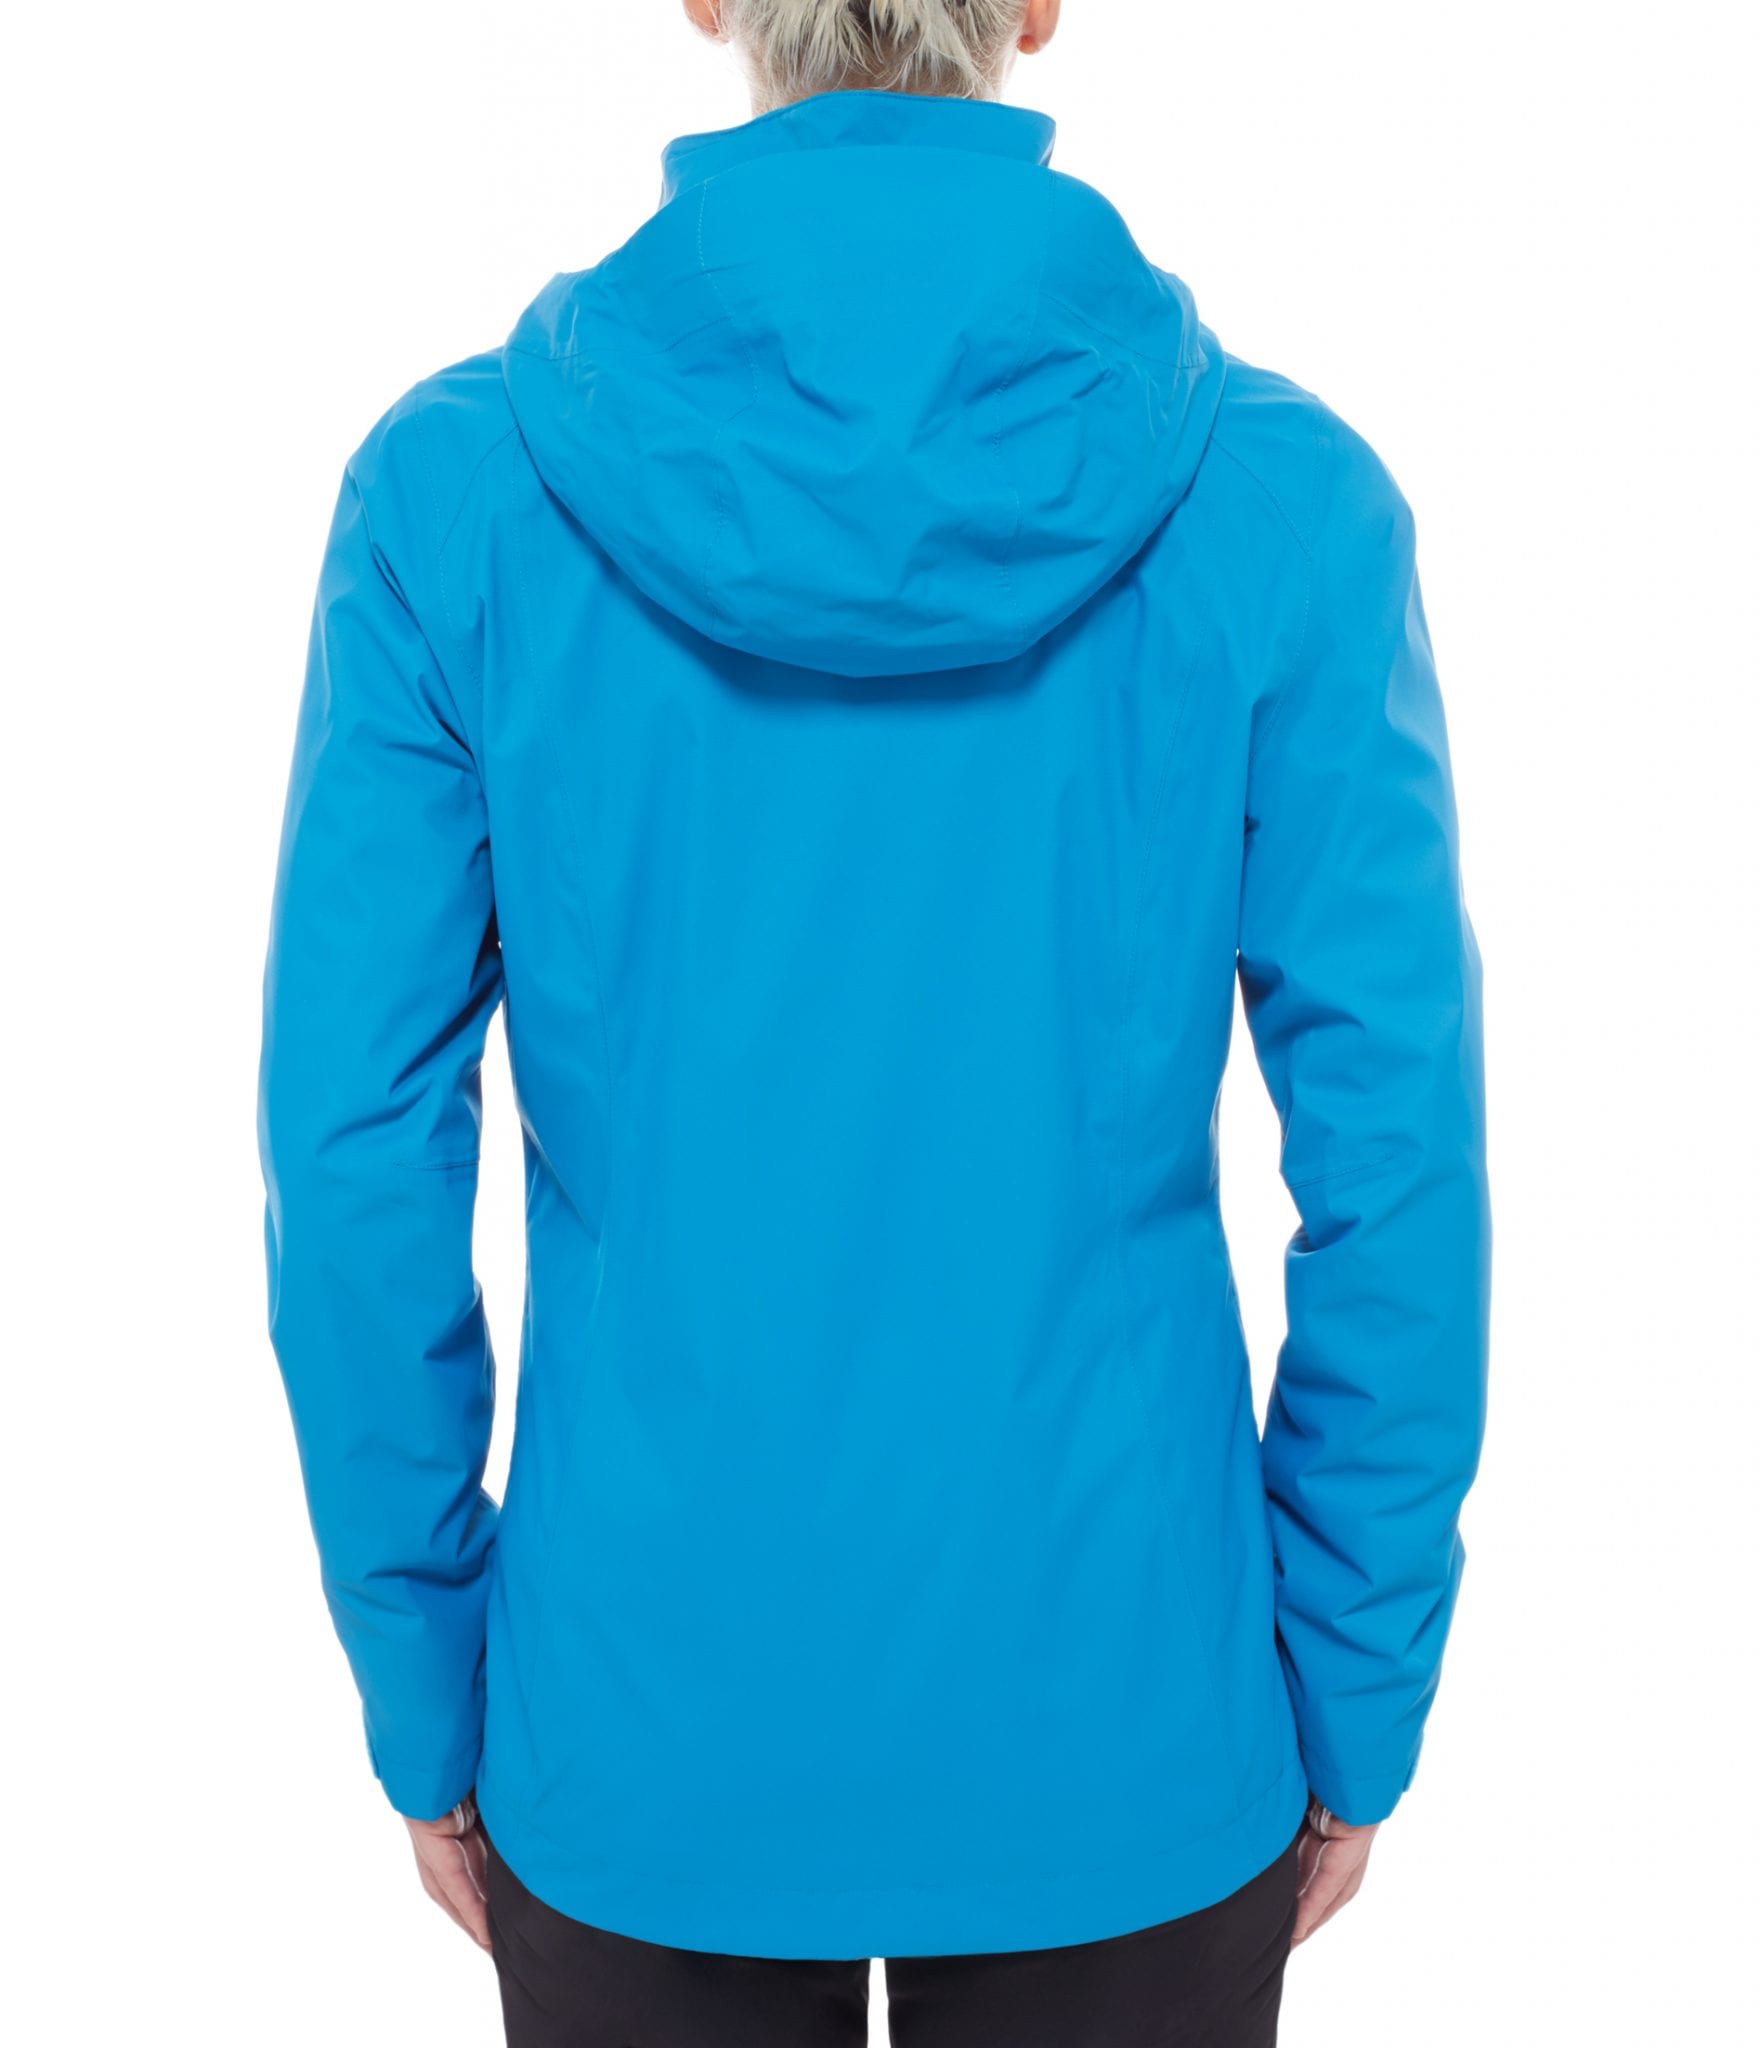 The North Face : W shop | Evolve – II triclimate jacket blue o-zone Danish